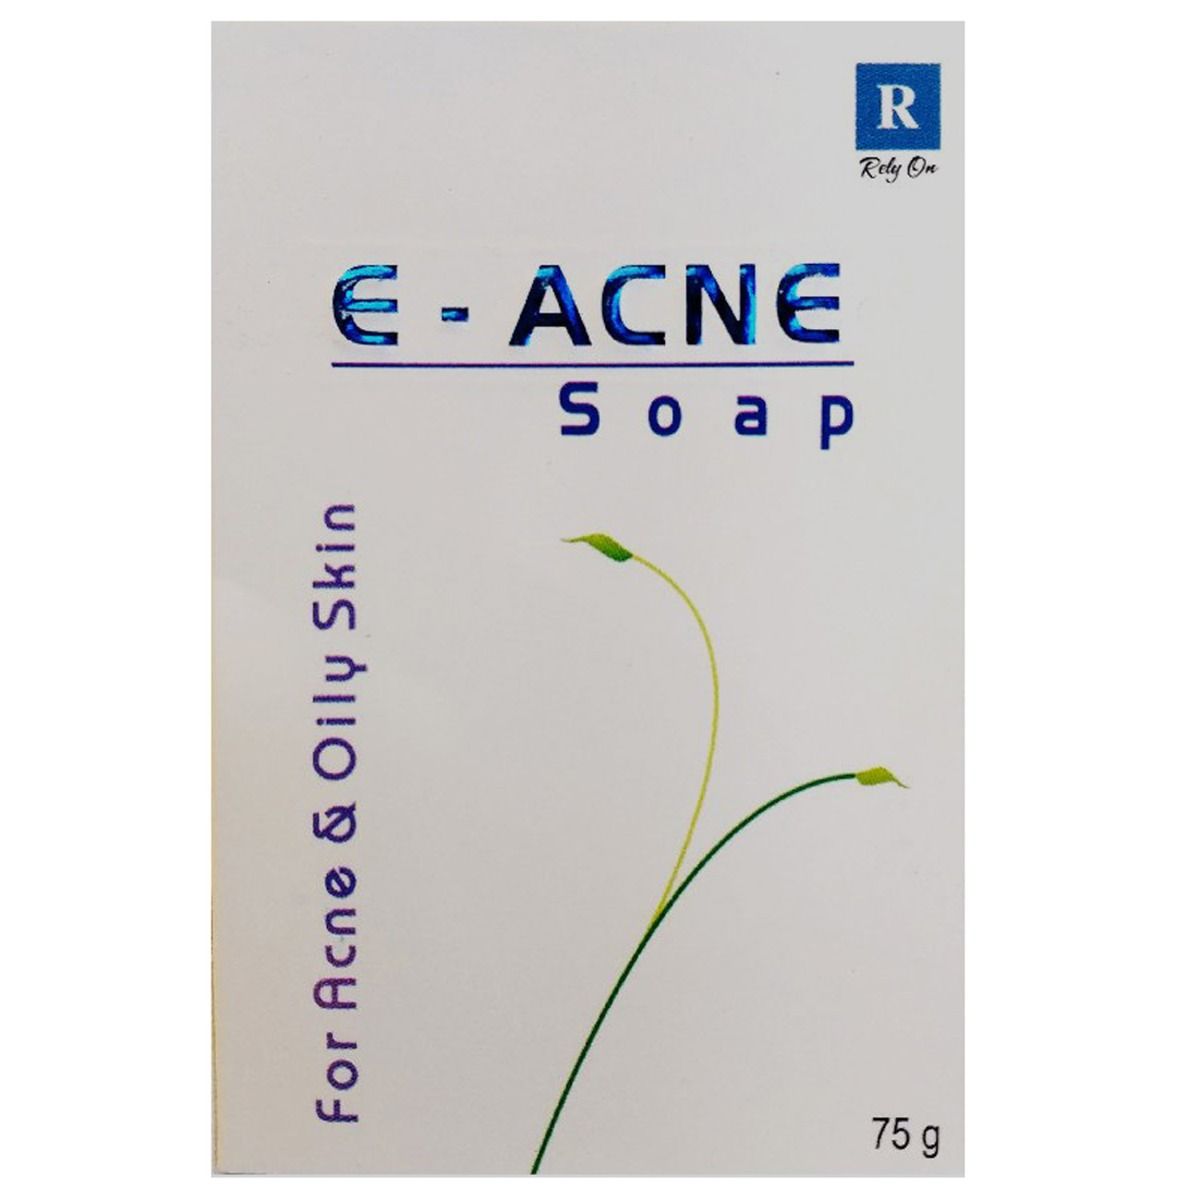 E-Acne Soap, 75 gm, Pack of 1 